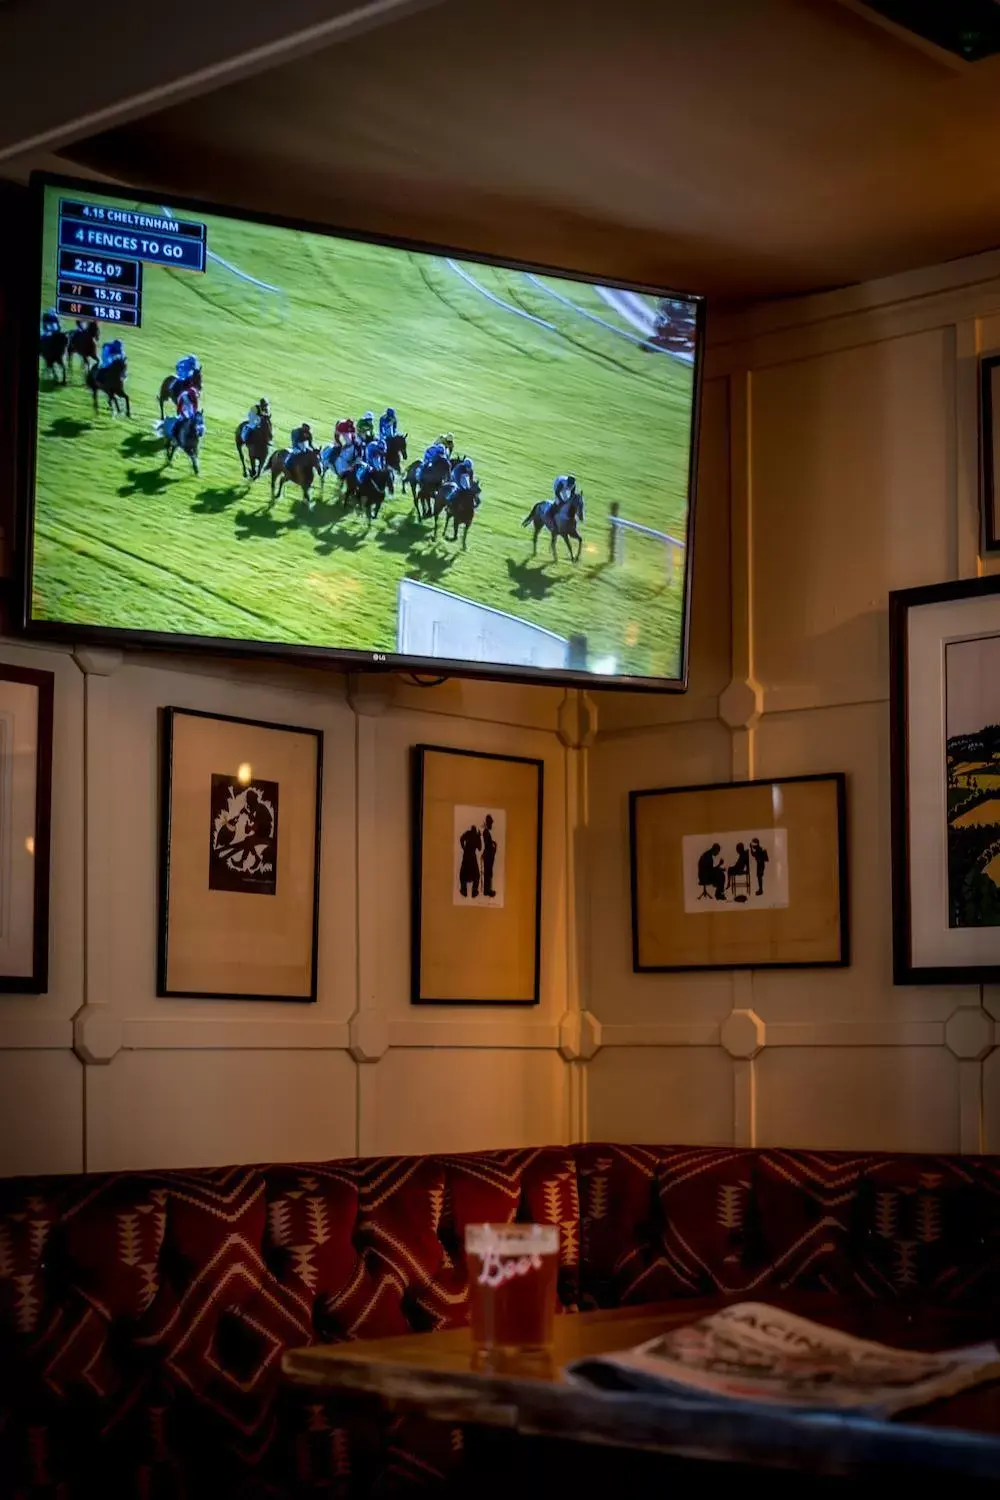 Property building, TV/Entertainment Center in The Queen's Arms